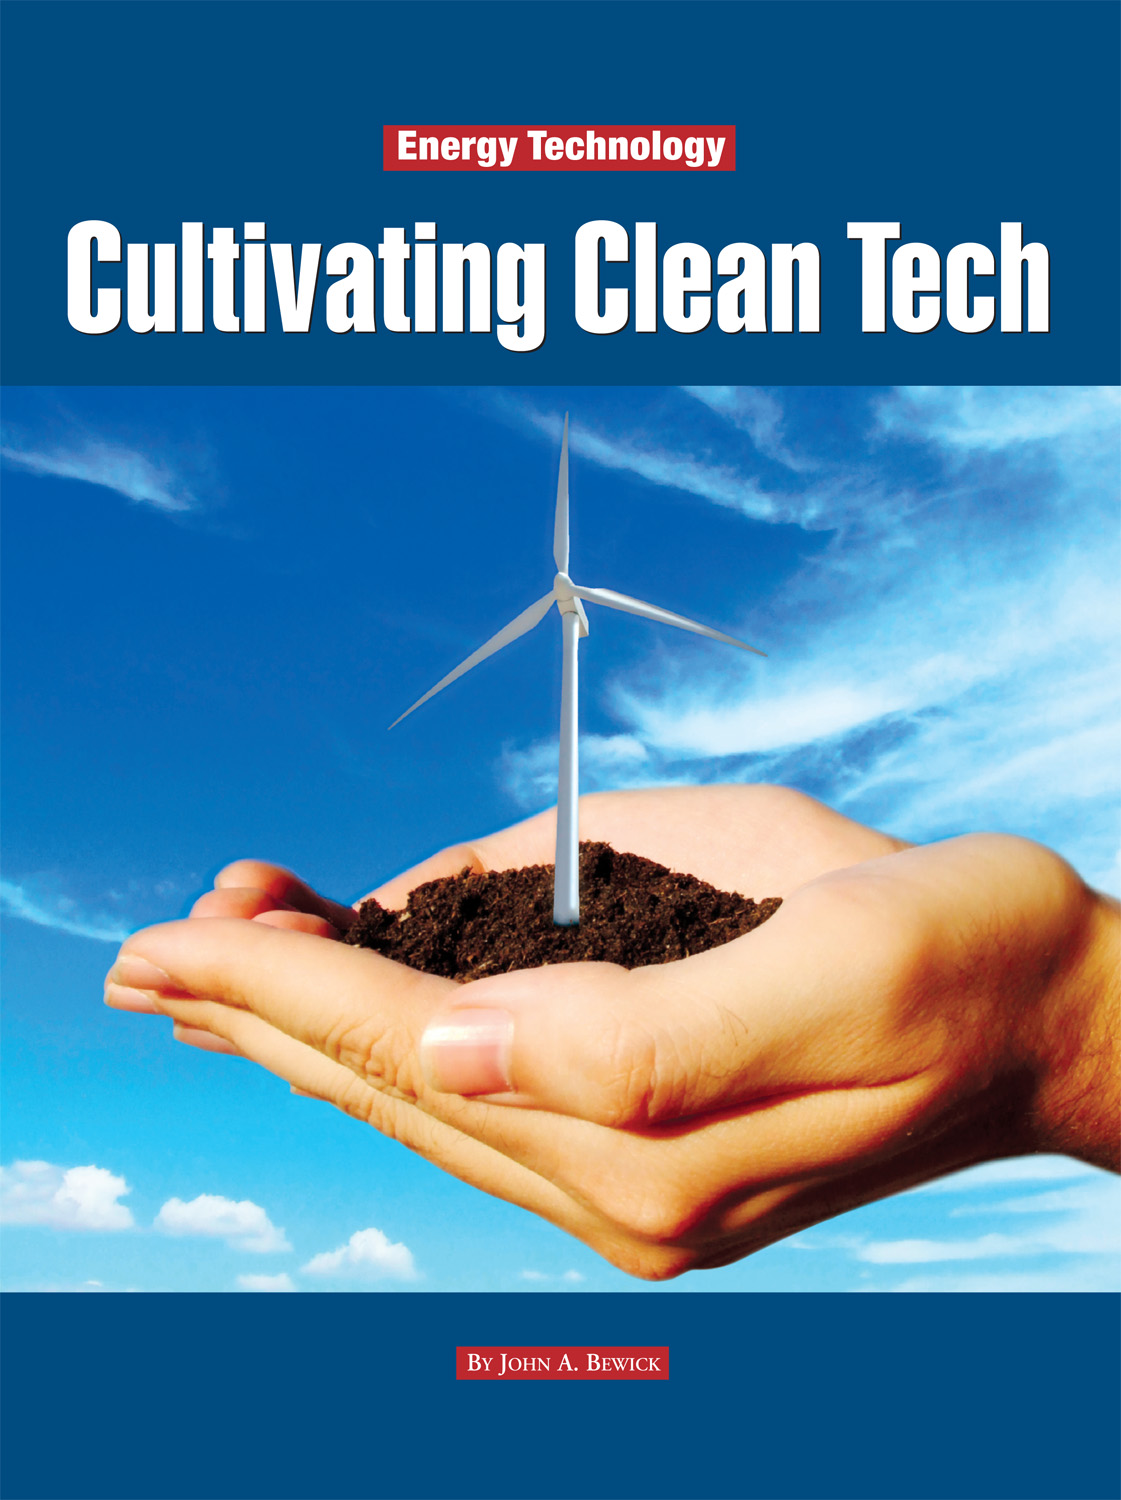 energy-technology-cultivating-clean-tech-fortnightly